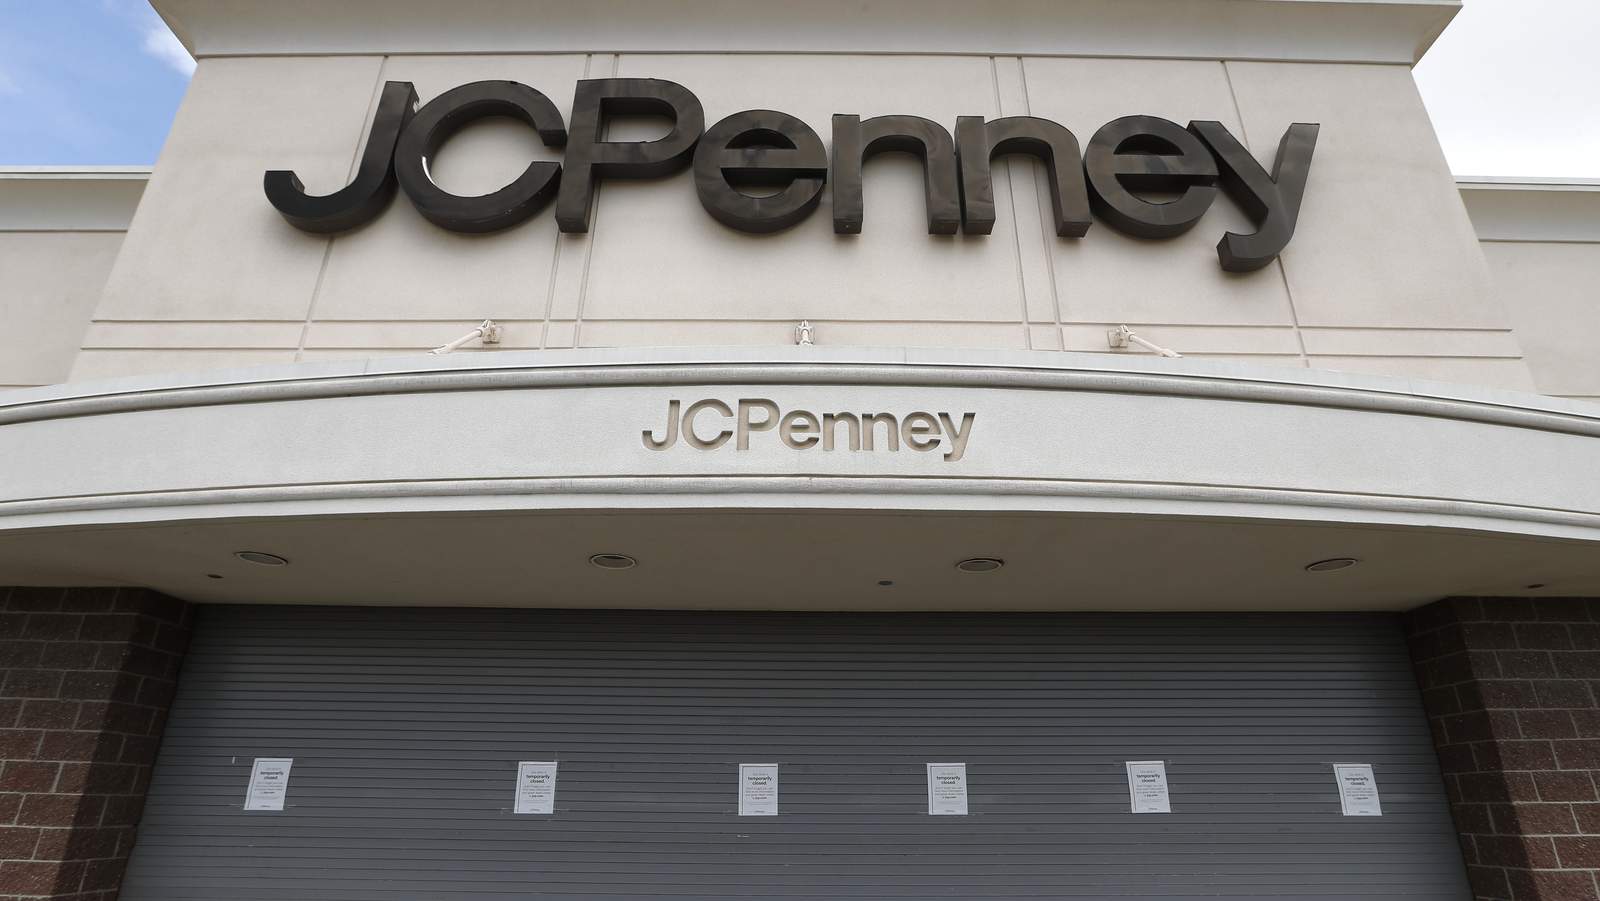 JC Penney closing 154 stores, including 3 in Michigan